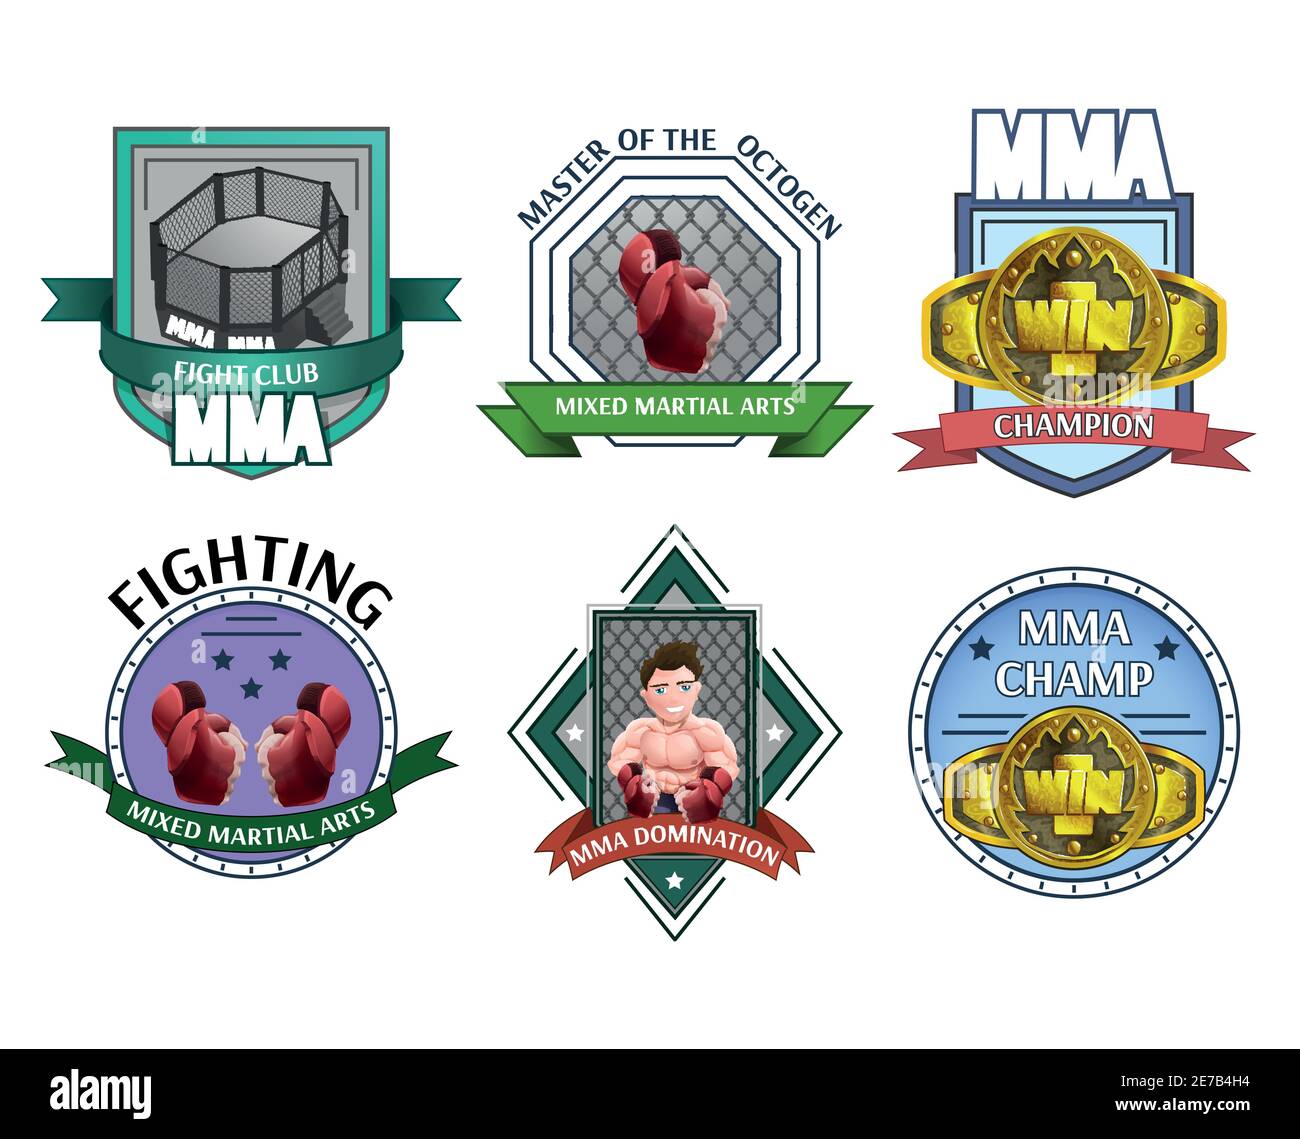 Martial fighting art mma champions league clubs emblems labels icons collection abstract isolated vector illustration Stock Vector